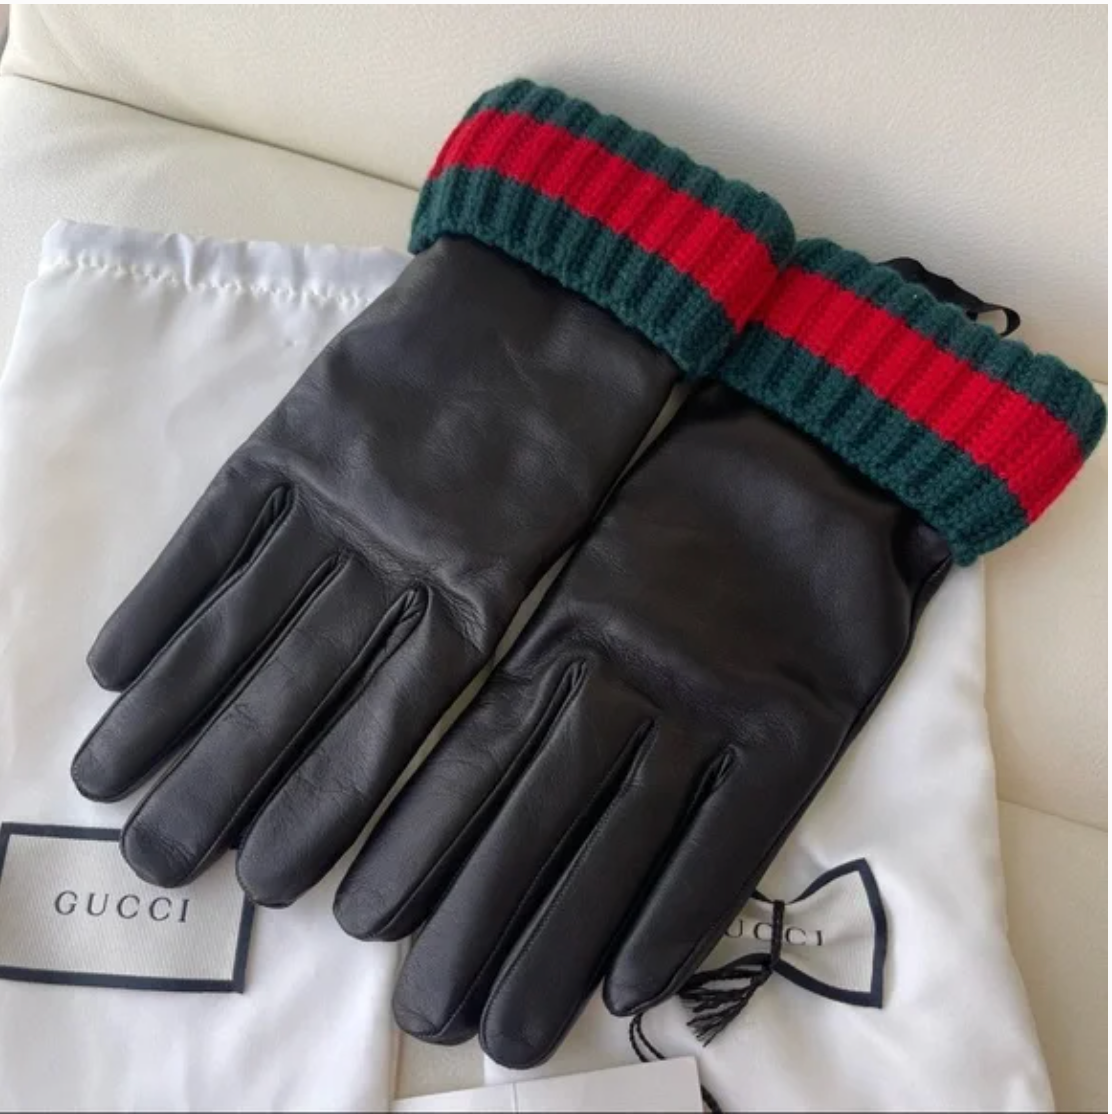 Gucci Gloves Men's 524061 BAP00 1000 Bee Black Lamb Leather & Cashmere (GGG1000)